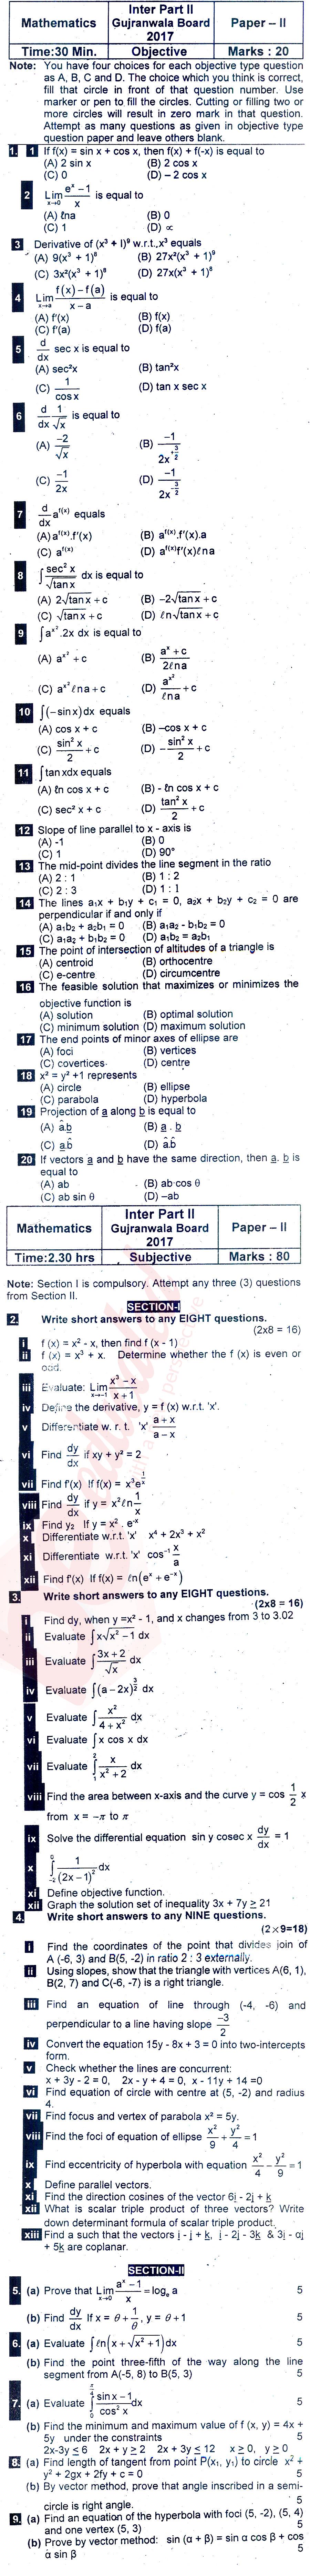 Math 12th class Past Paper Group 1 BISE Gujranwala 2017